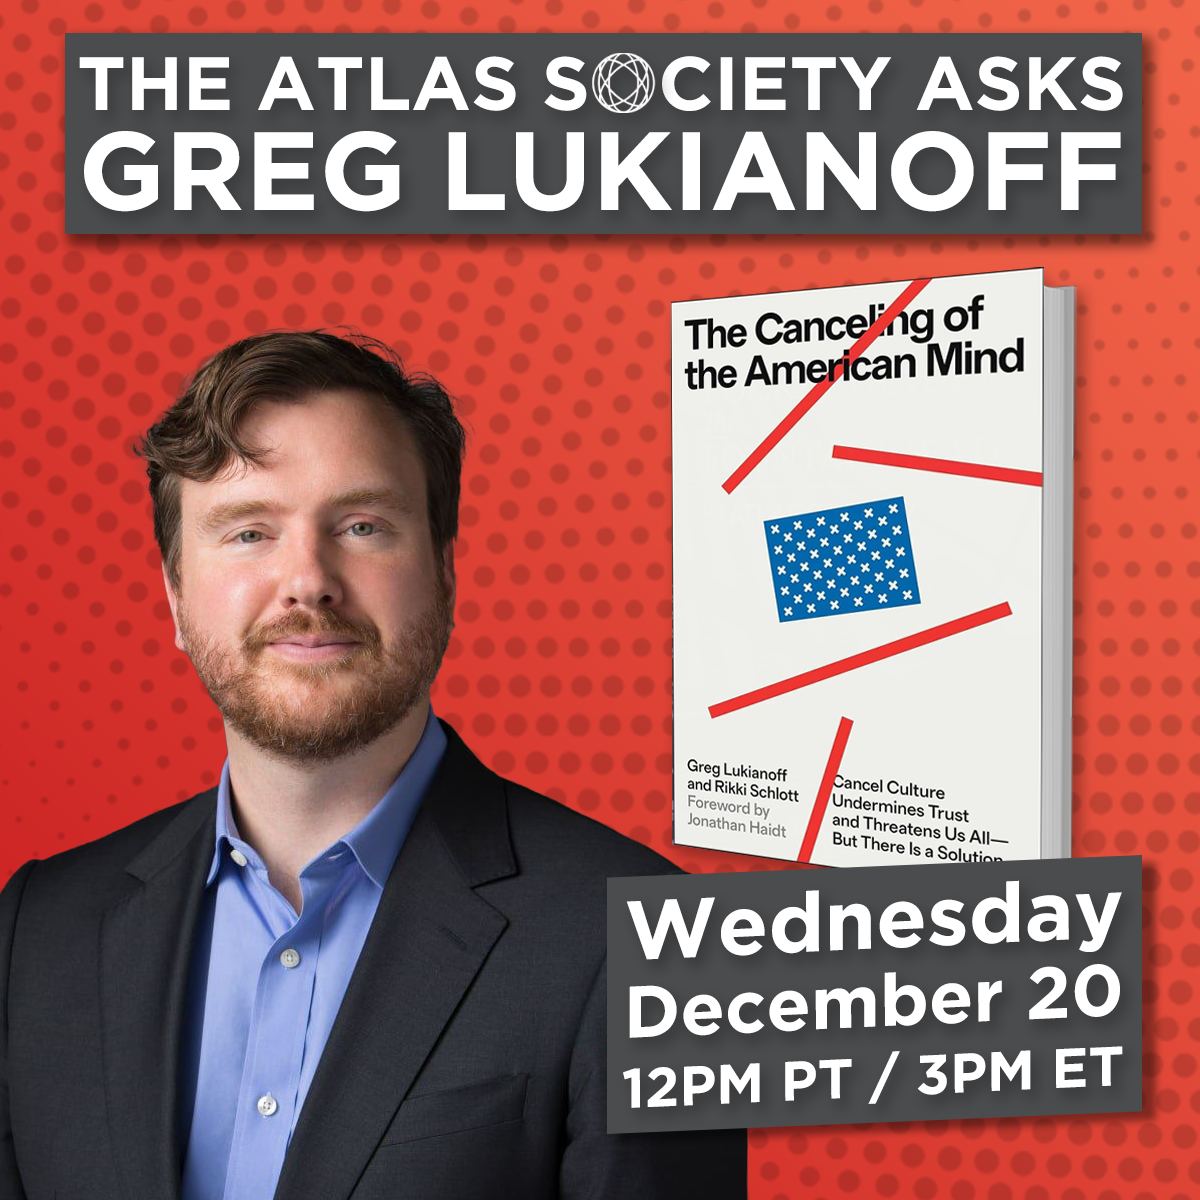 The Canceling of the American Mind: The Atlas Society Asks Greg Lukianoff